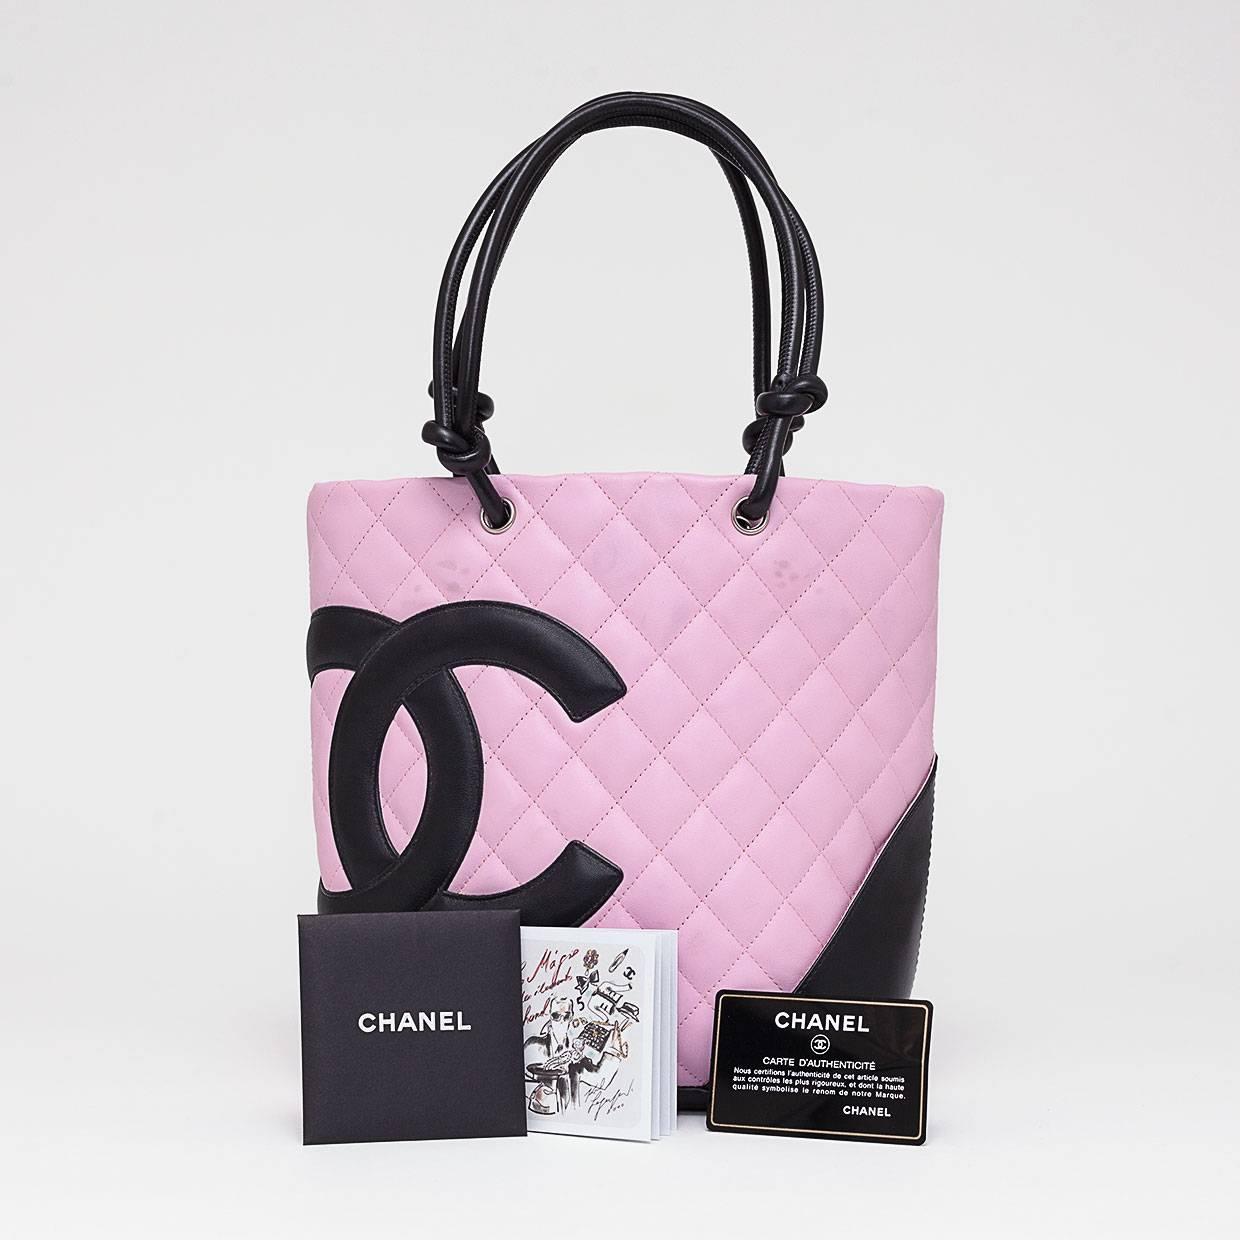 Founded in 1909 by French designer Gabrielle “Coco” Chanel, the House of Chanel transcends time with its iconic design & avant-garde Parisian style. Coco said, 